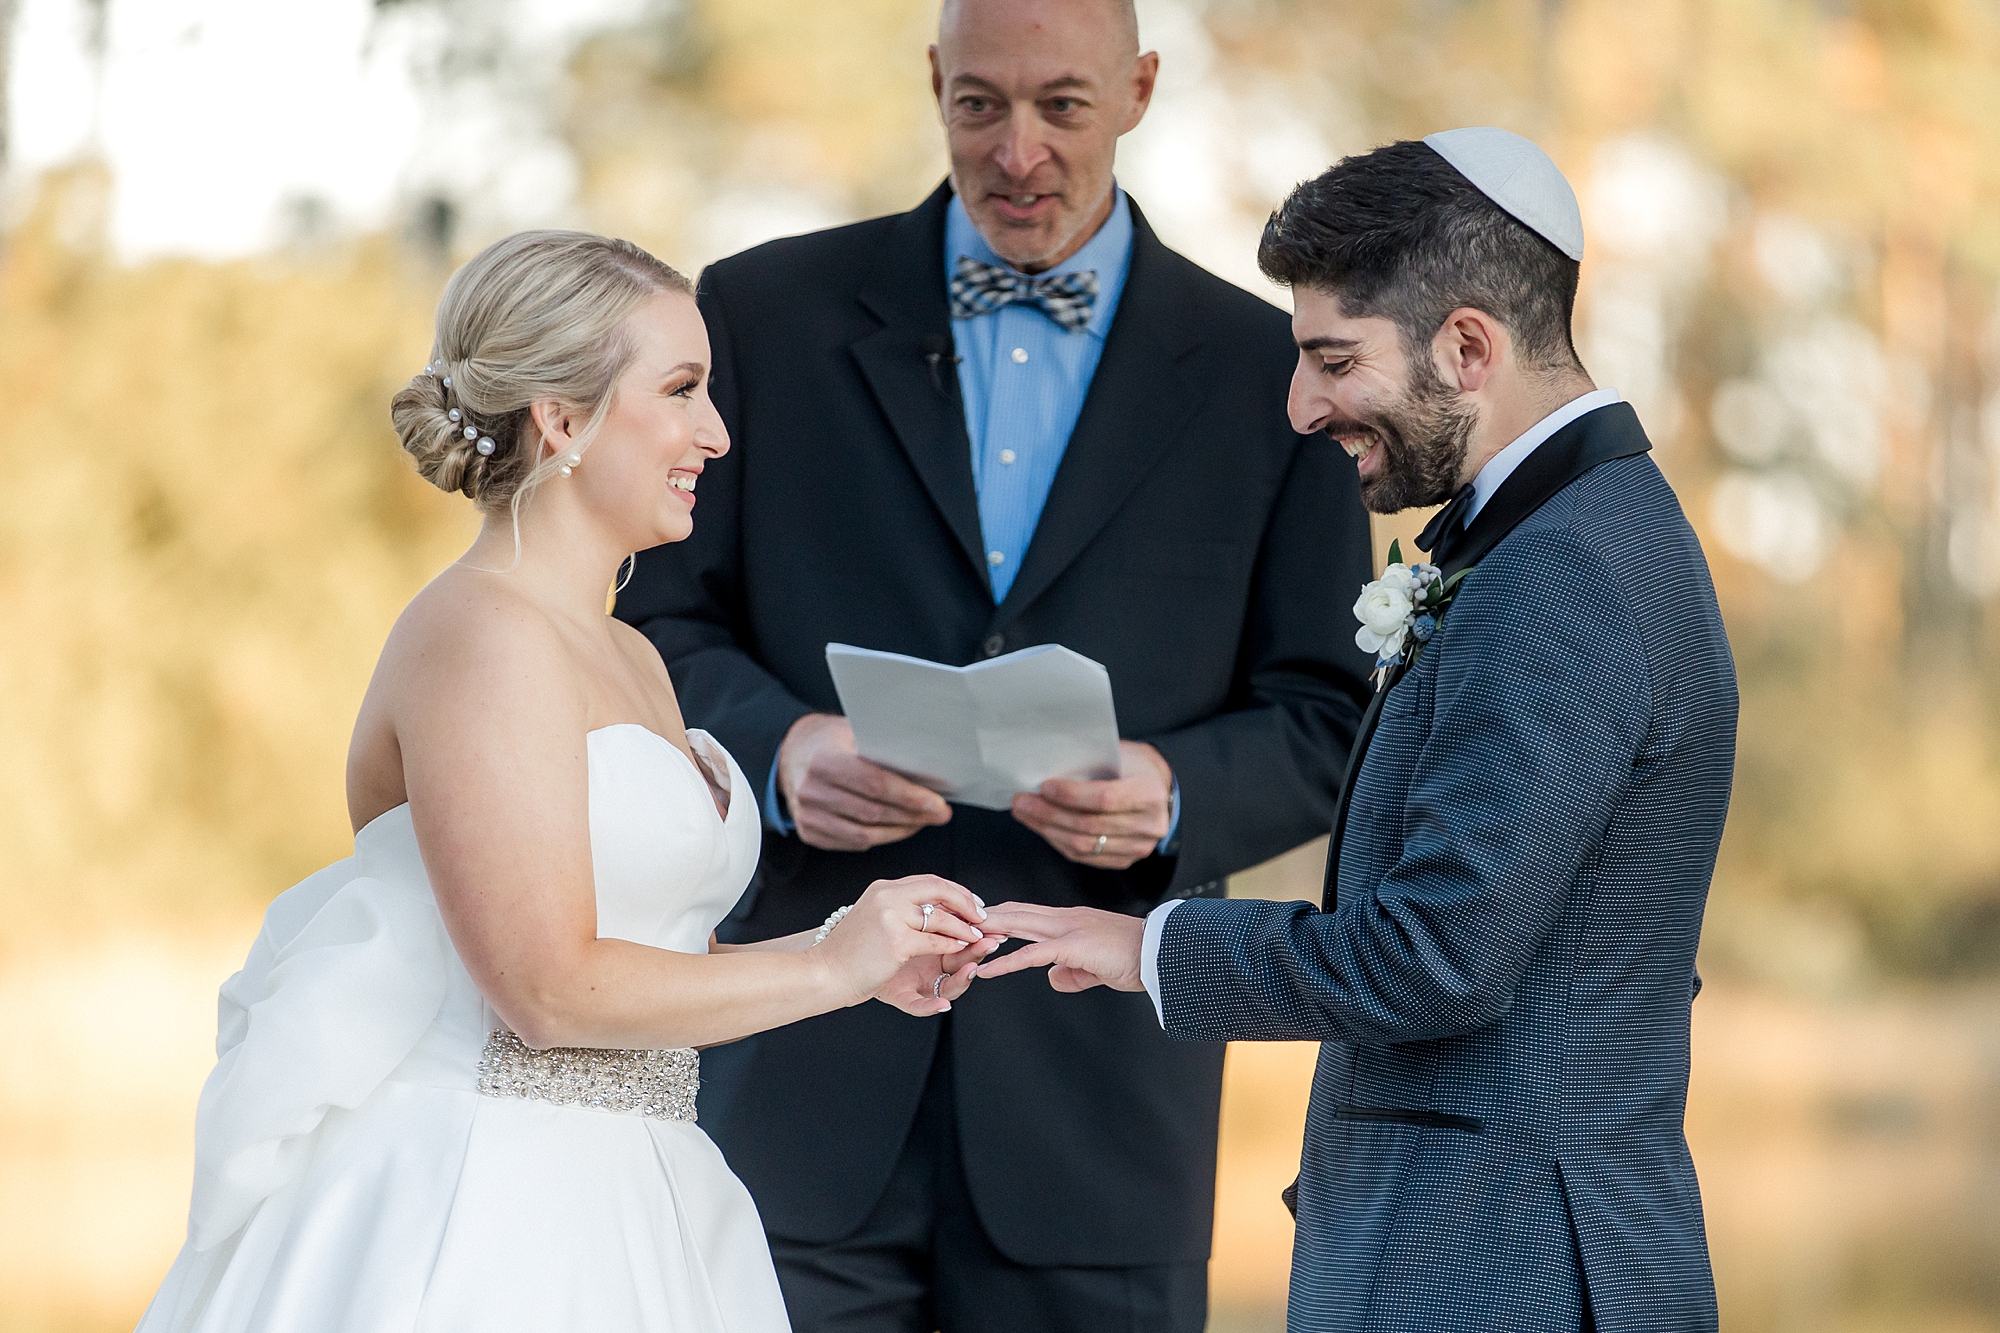 couple exchange rings during outdoor wedding ceremony